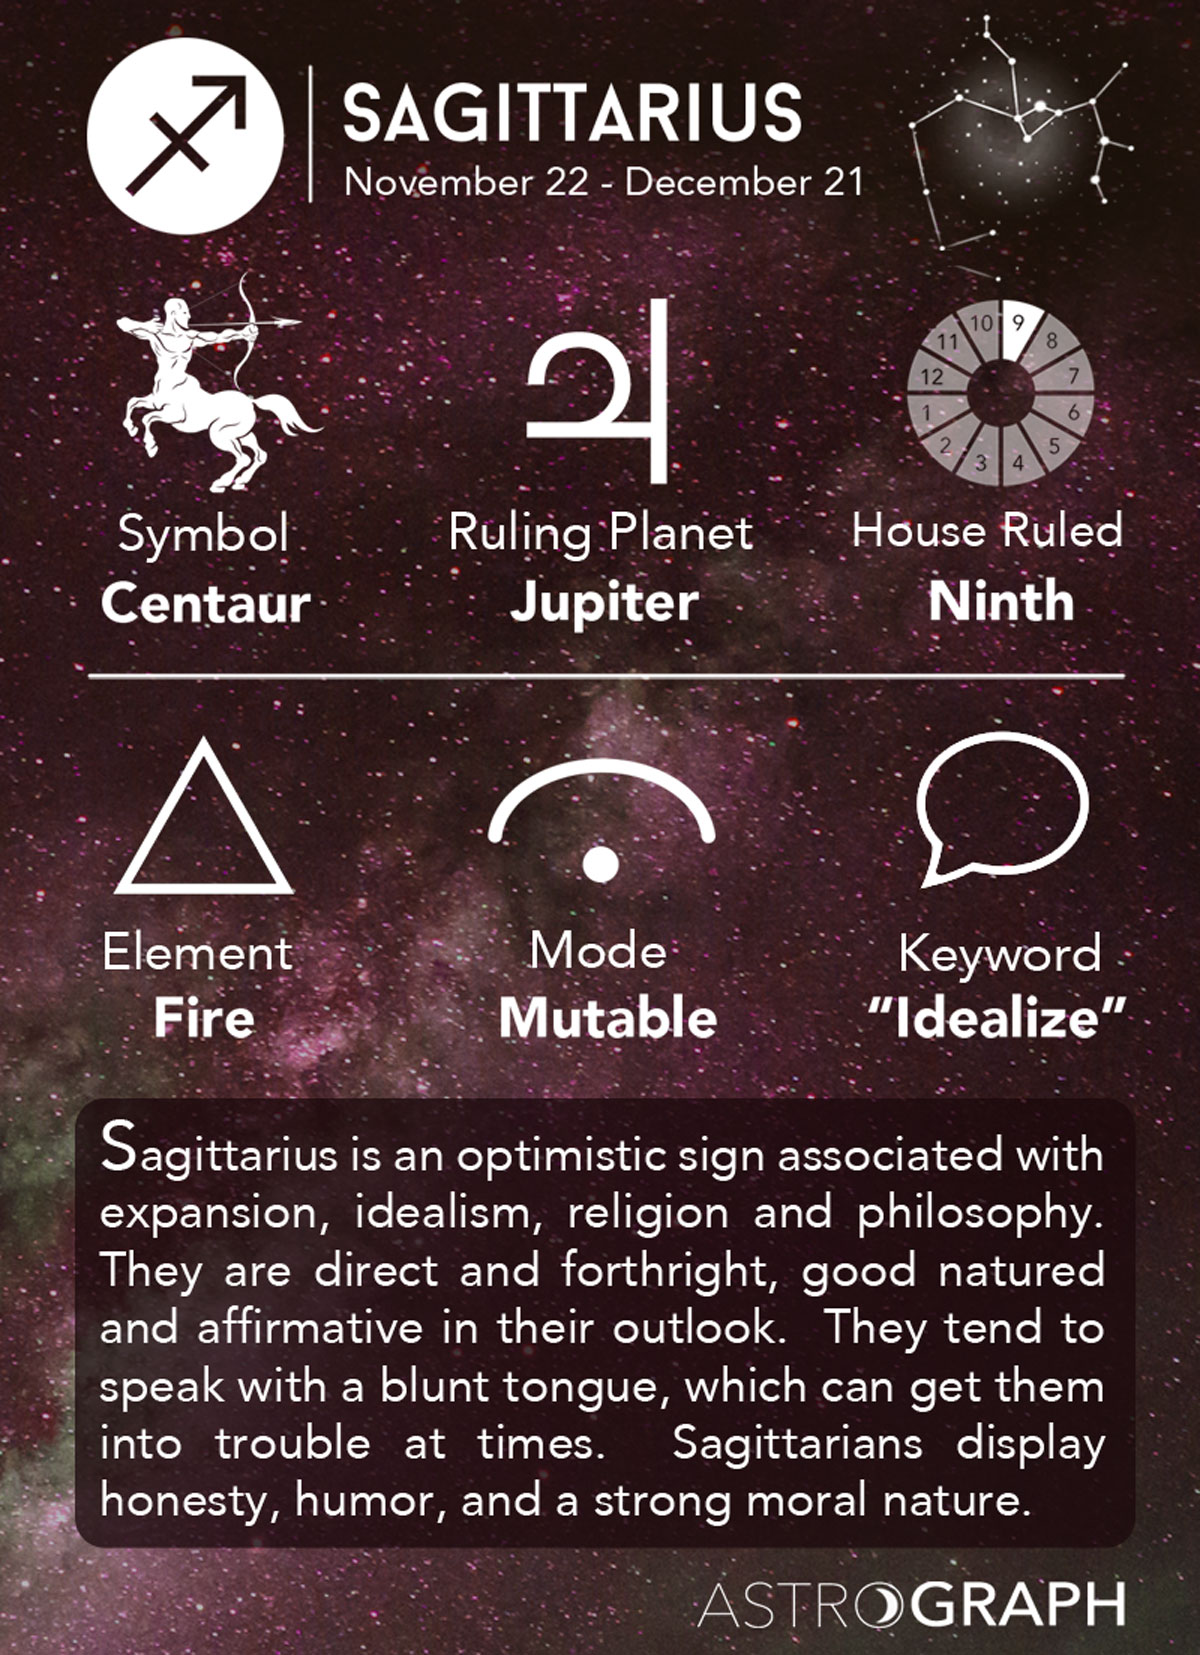 What kind of sign is Sagittarius?